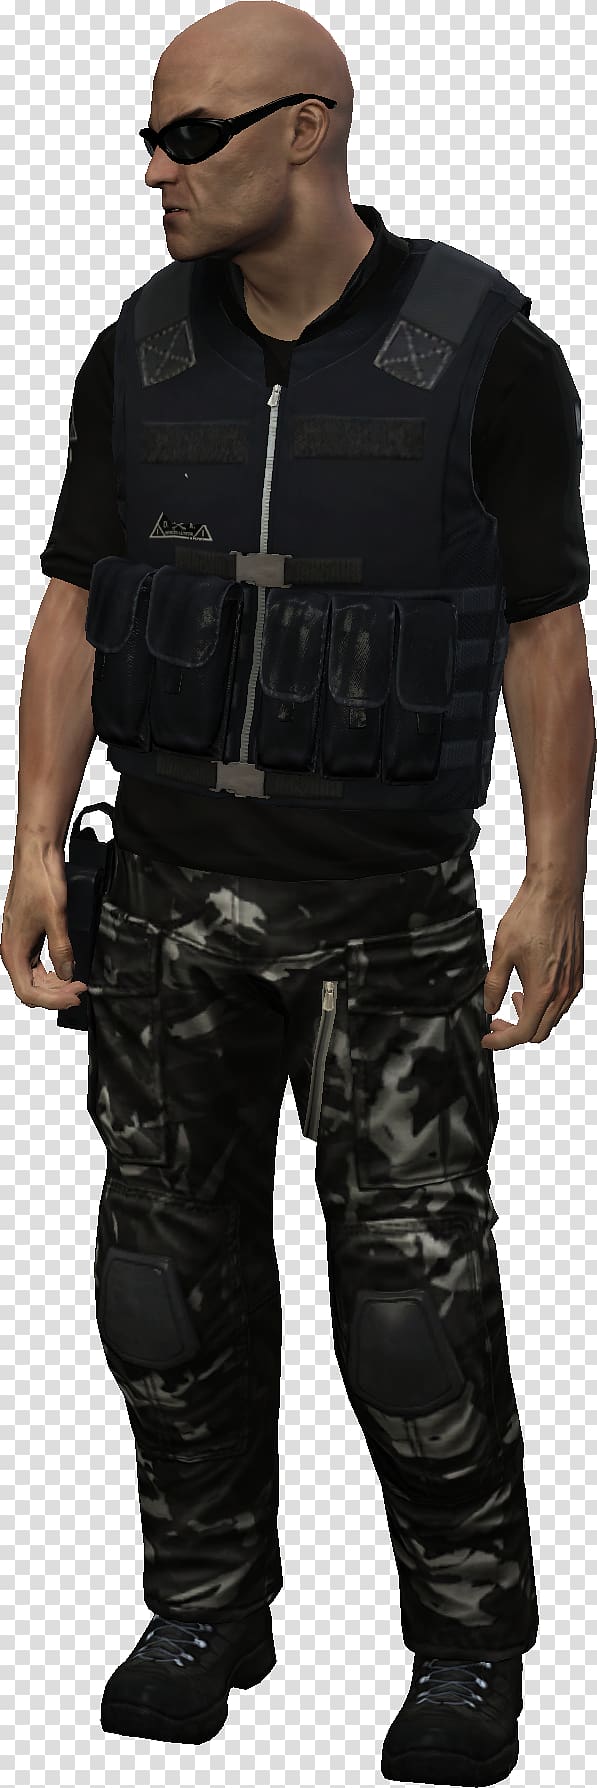 Hitman: Absolution Soldier Wikia Military, soldiers transparent background PNG clipart